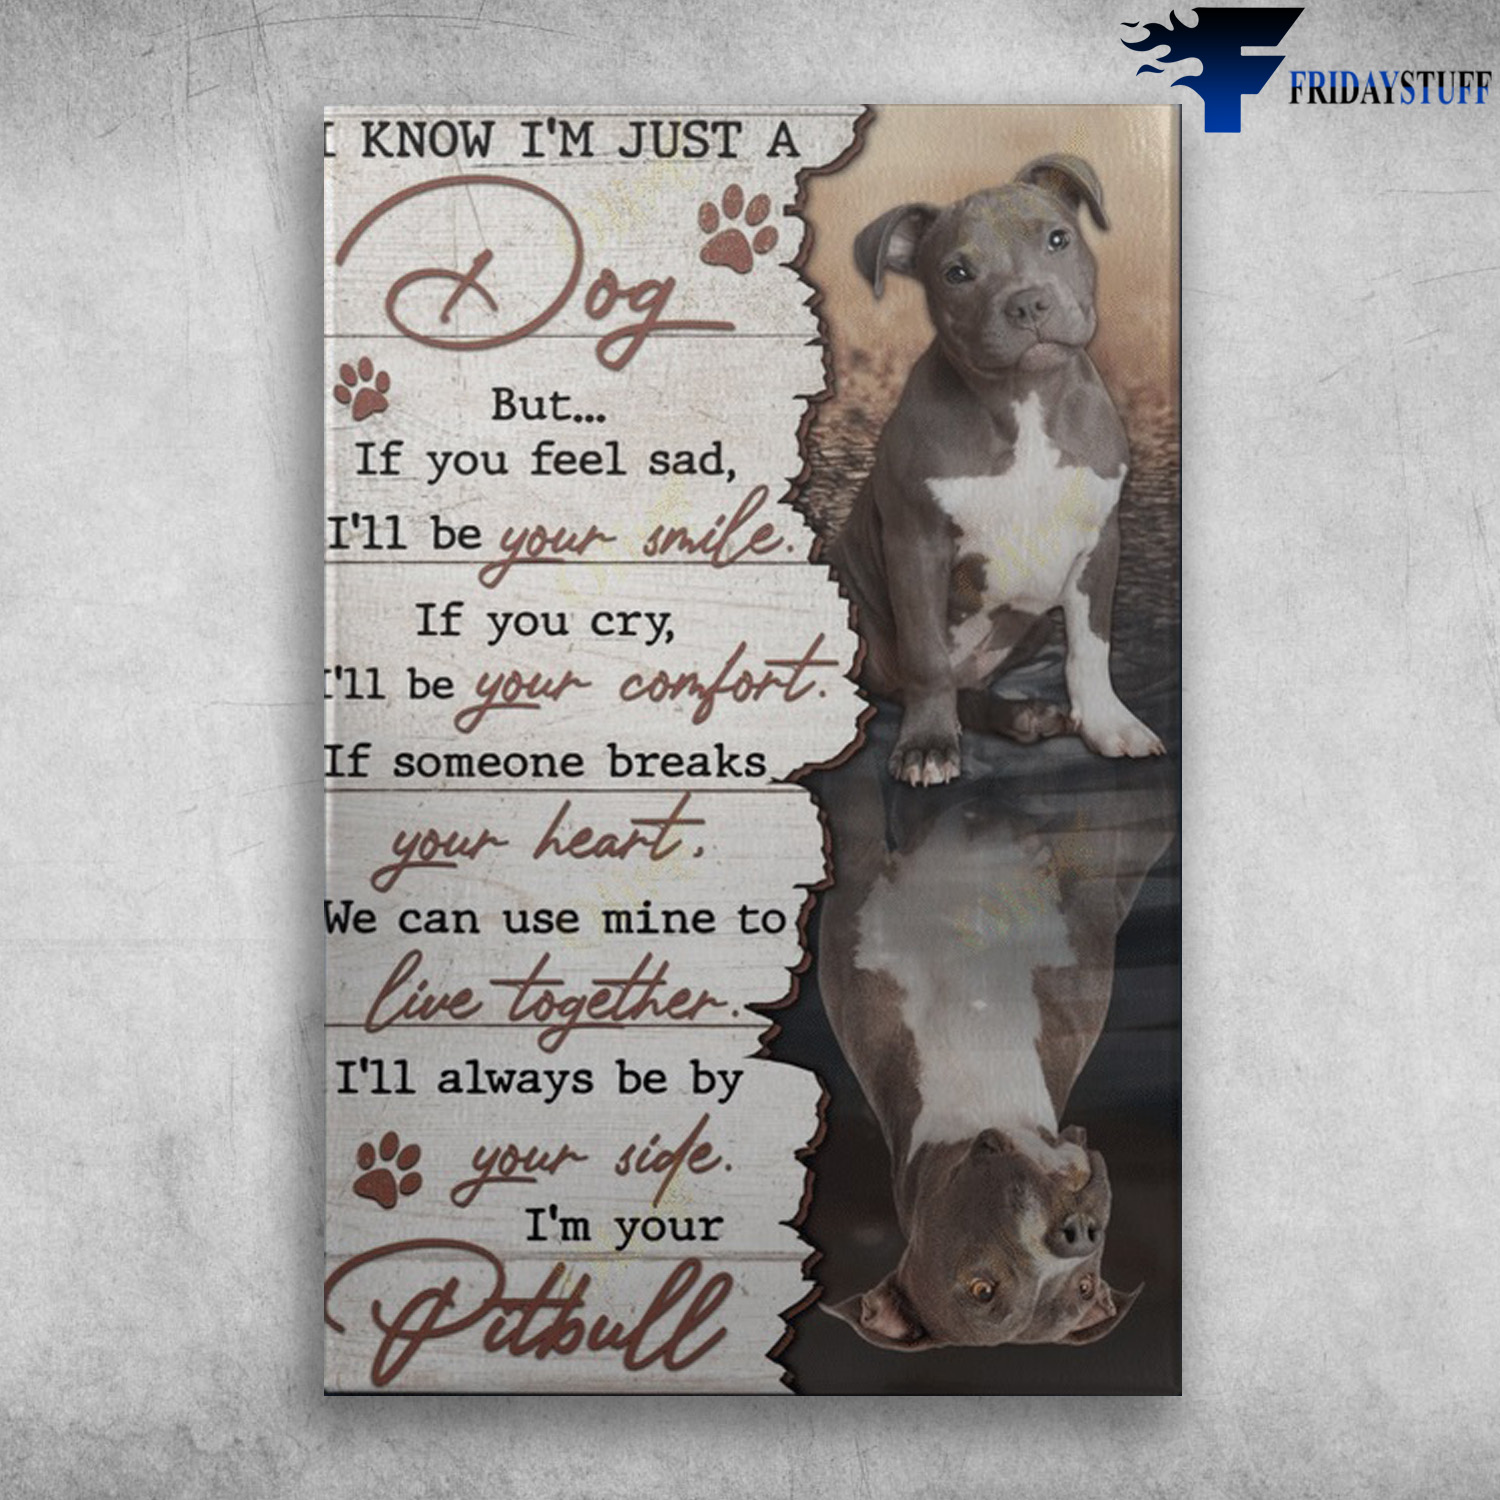 Pitbull Dog - I Know I'm Just A Dog, But If You Feel Sad, I'll Be Your Smile, If You Cry, I'll Be Your Comfort, If Someone Breaks Your Heart, We Can Use Mine To Live Together, I'll Always Be By Your Side, I'm Your Pitbull